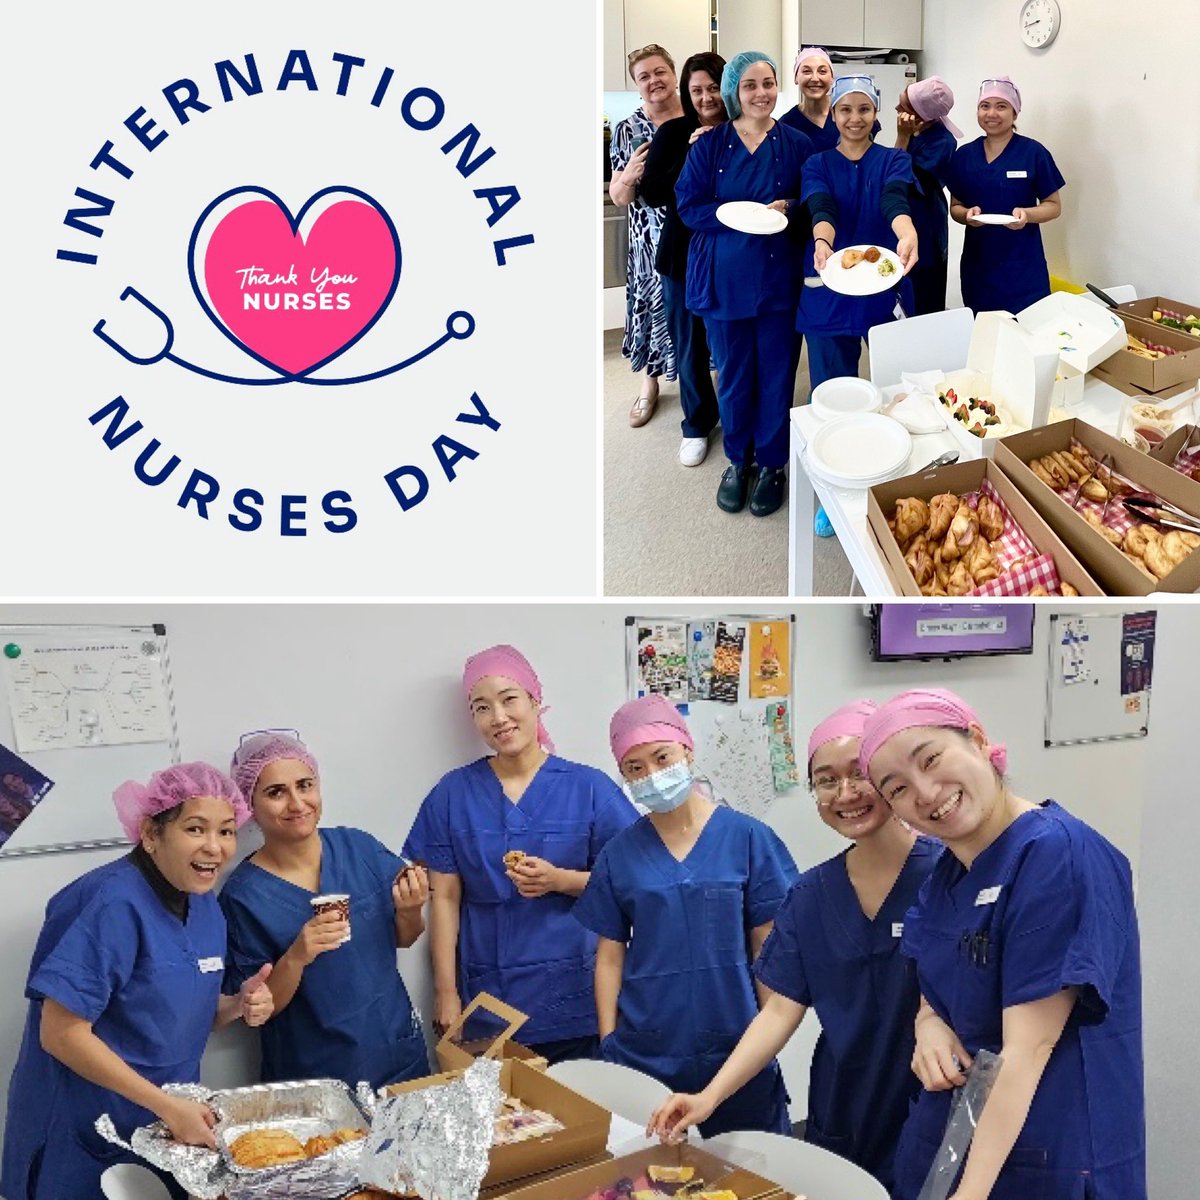 #InternationalNursesDay is celebrated each year on 12 May, the birthday of Florence Nightingale. This week at #TheSkinHospital, we have been recognising all our #nurses. With nearly 50 nurses working across our facilities, we would like to say a huge #thankyounurses!#dermatology